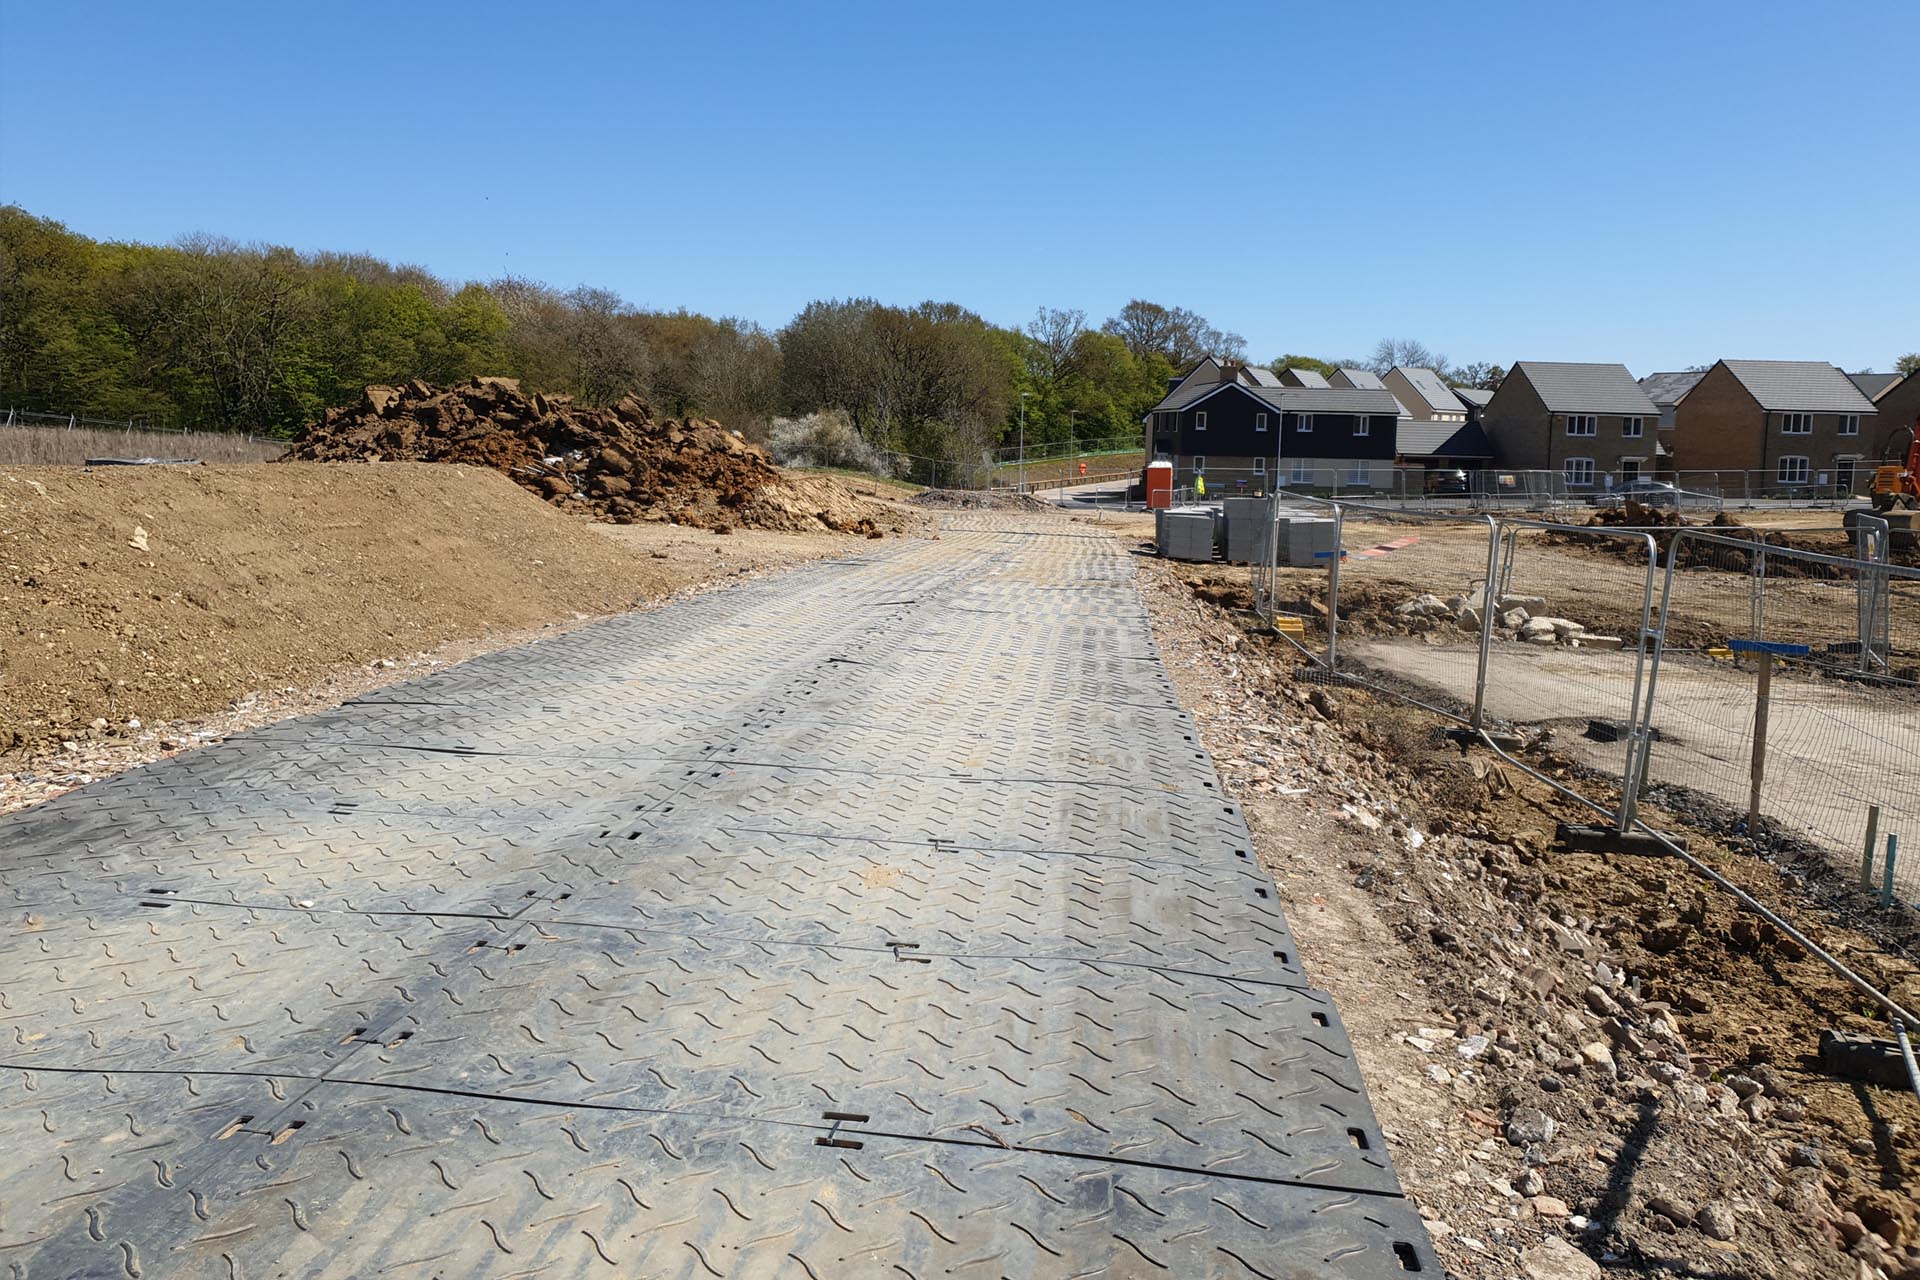 eurotrak-hd-access-mat-ground-protection-temporary-access-housing-development-project-spoilboard